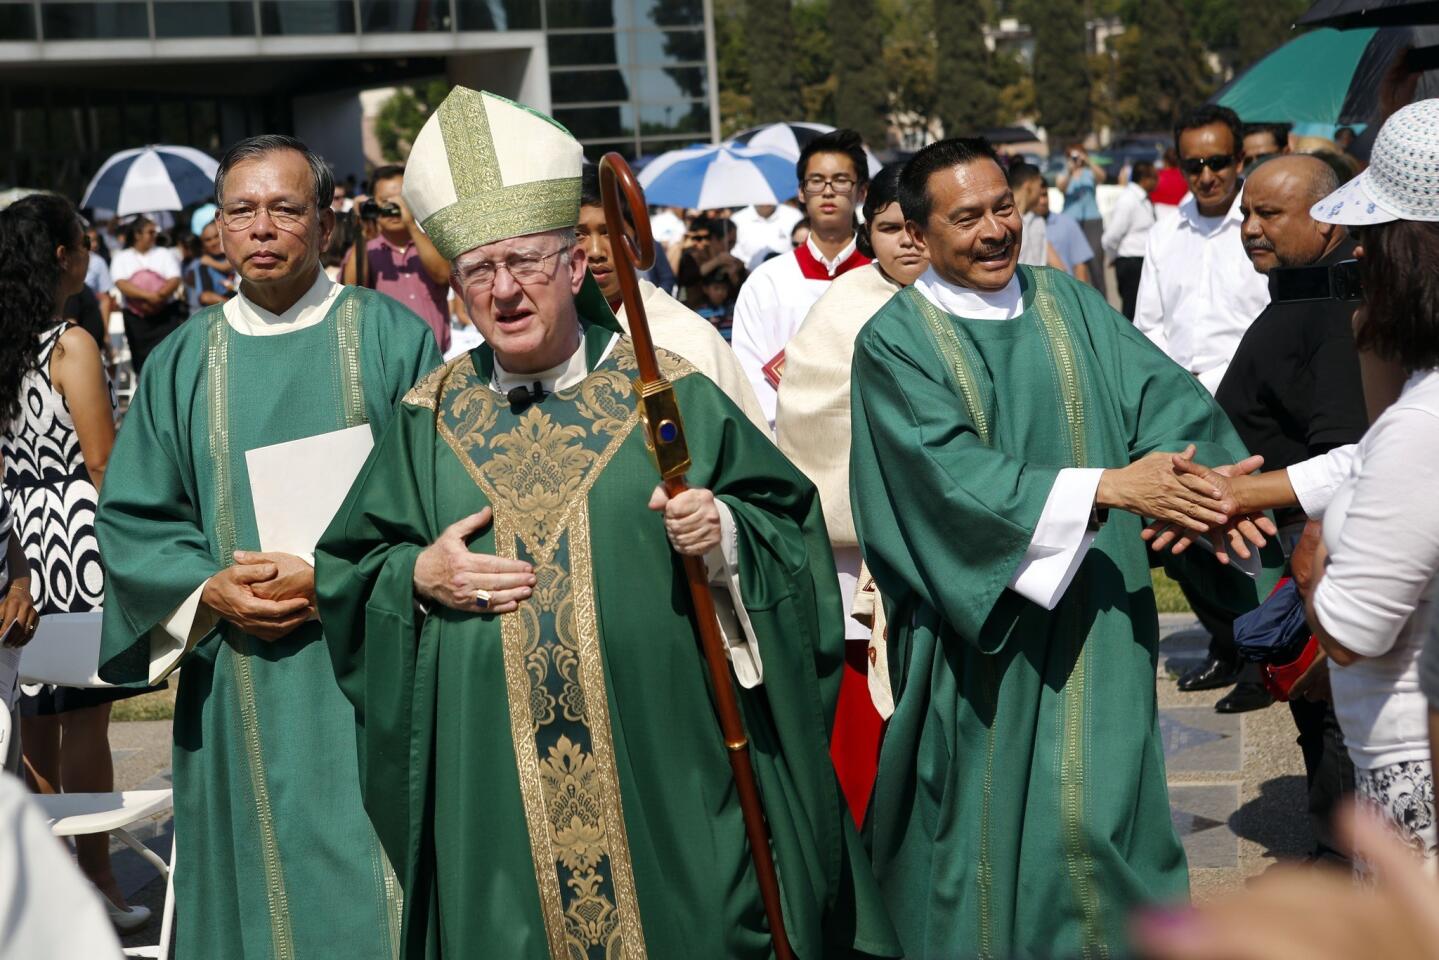 Processional with deacon